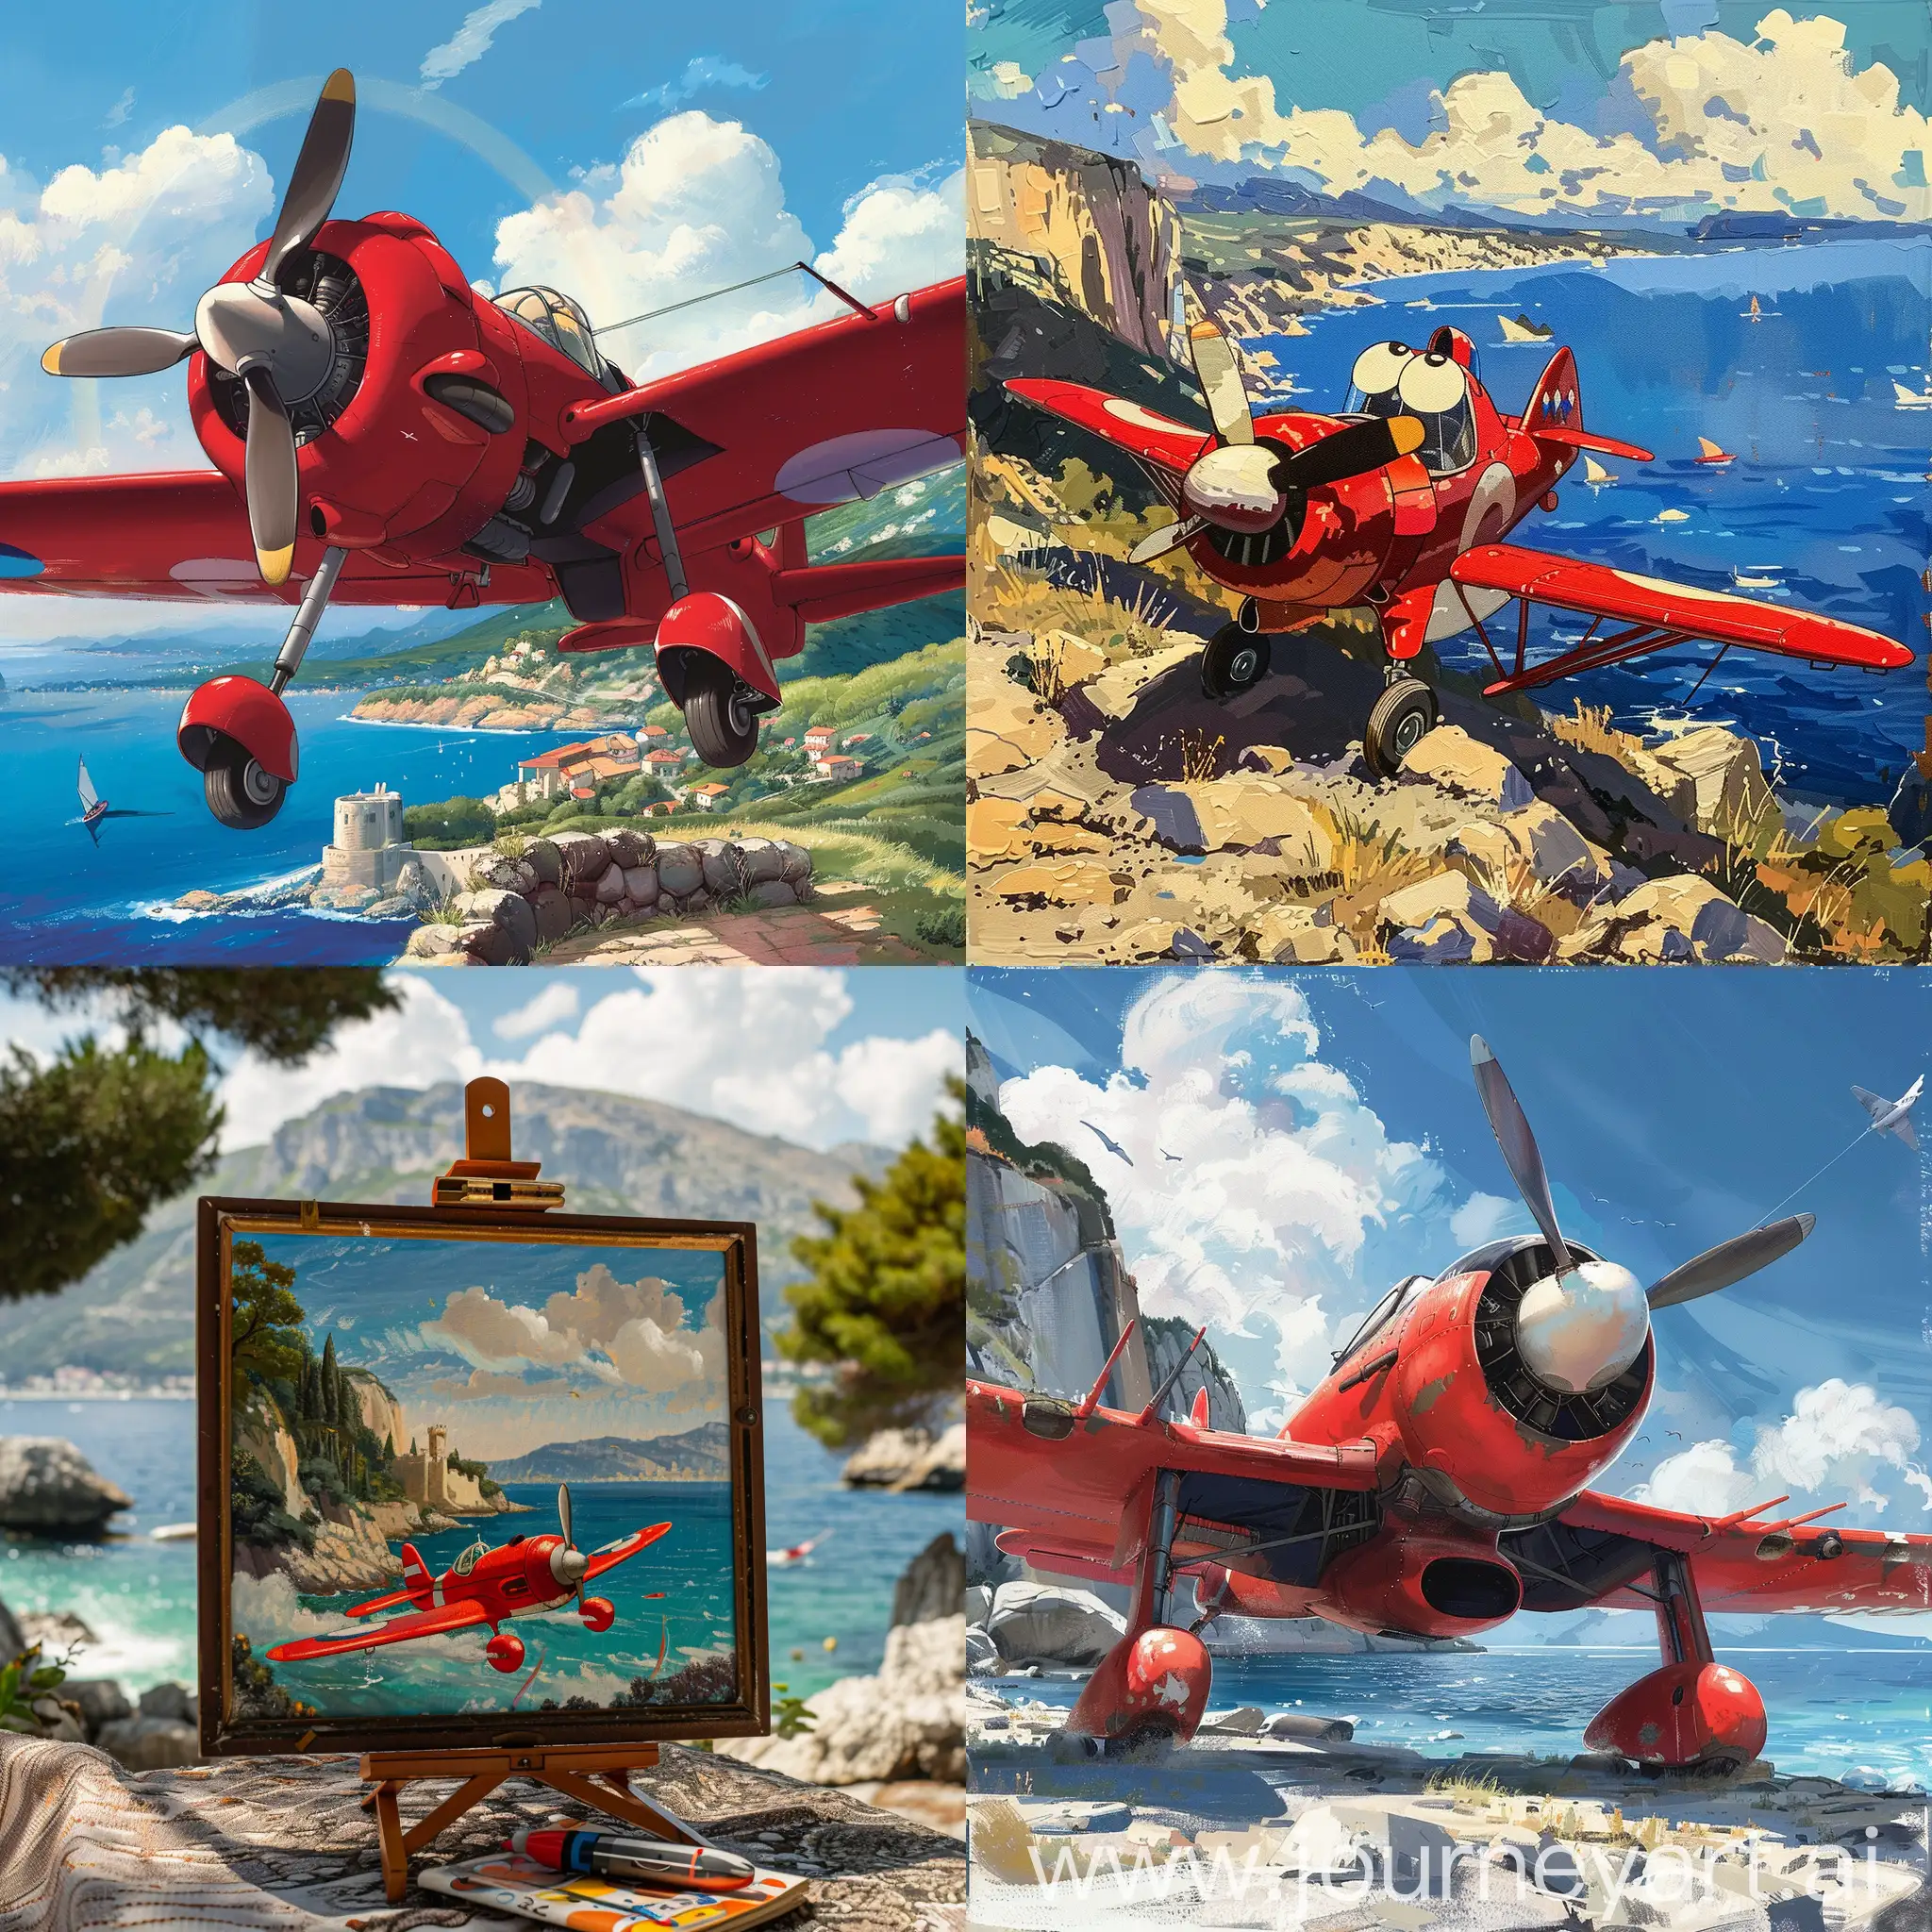 portrait of porco rosso from studio ghibli, background adriatic sea and his red airplane